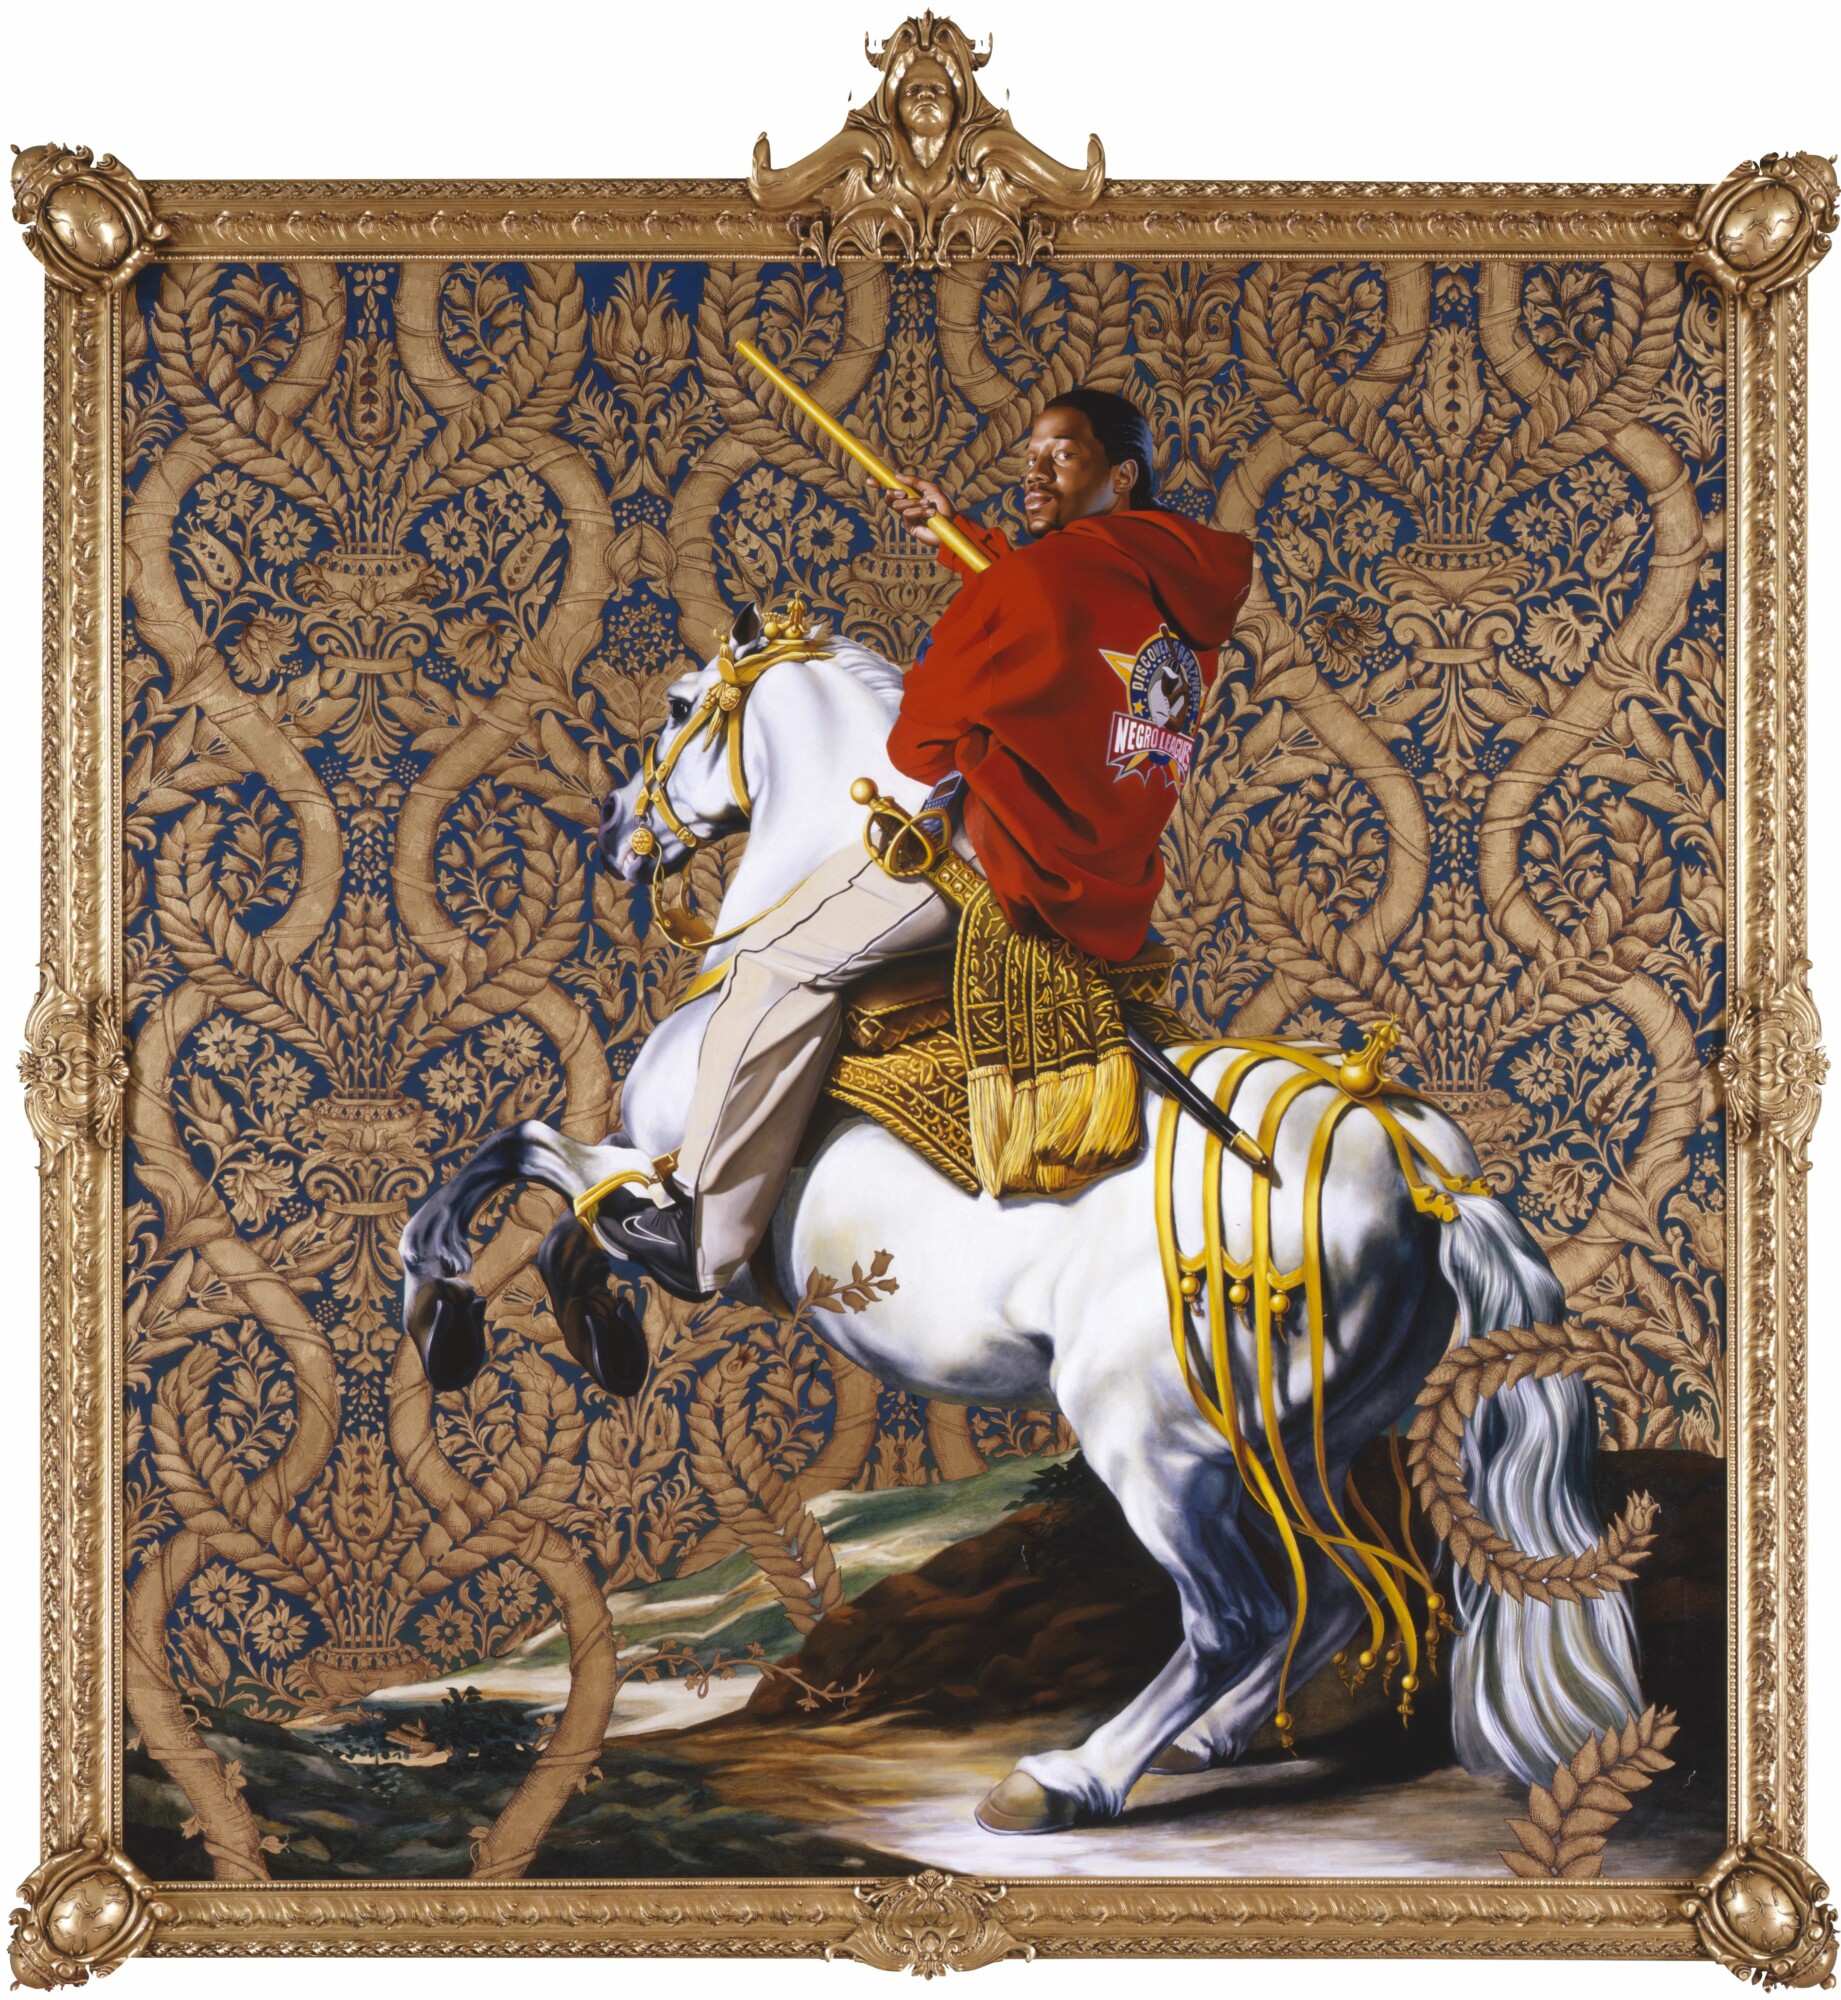 kehindewiley_a new republic_Equestrian Portrait of the Count-Duke Olivares